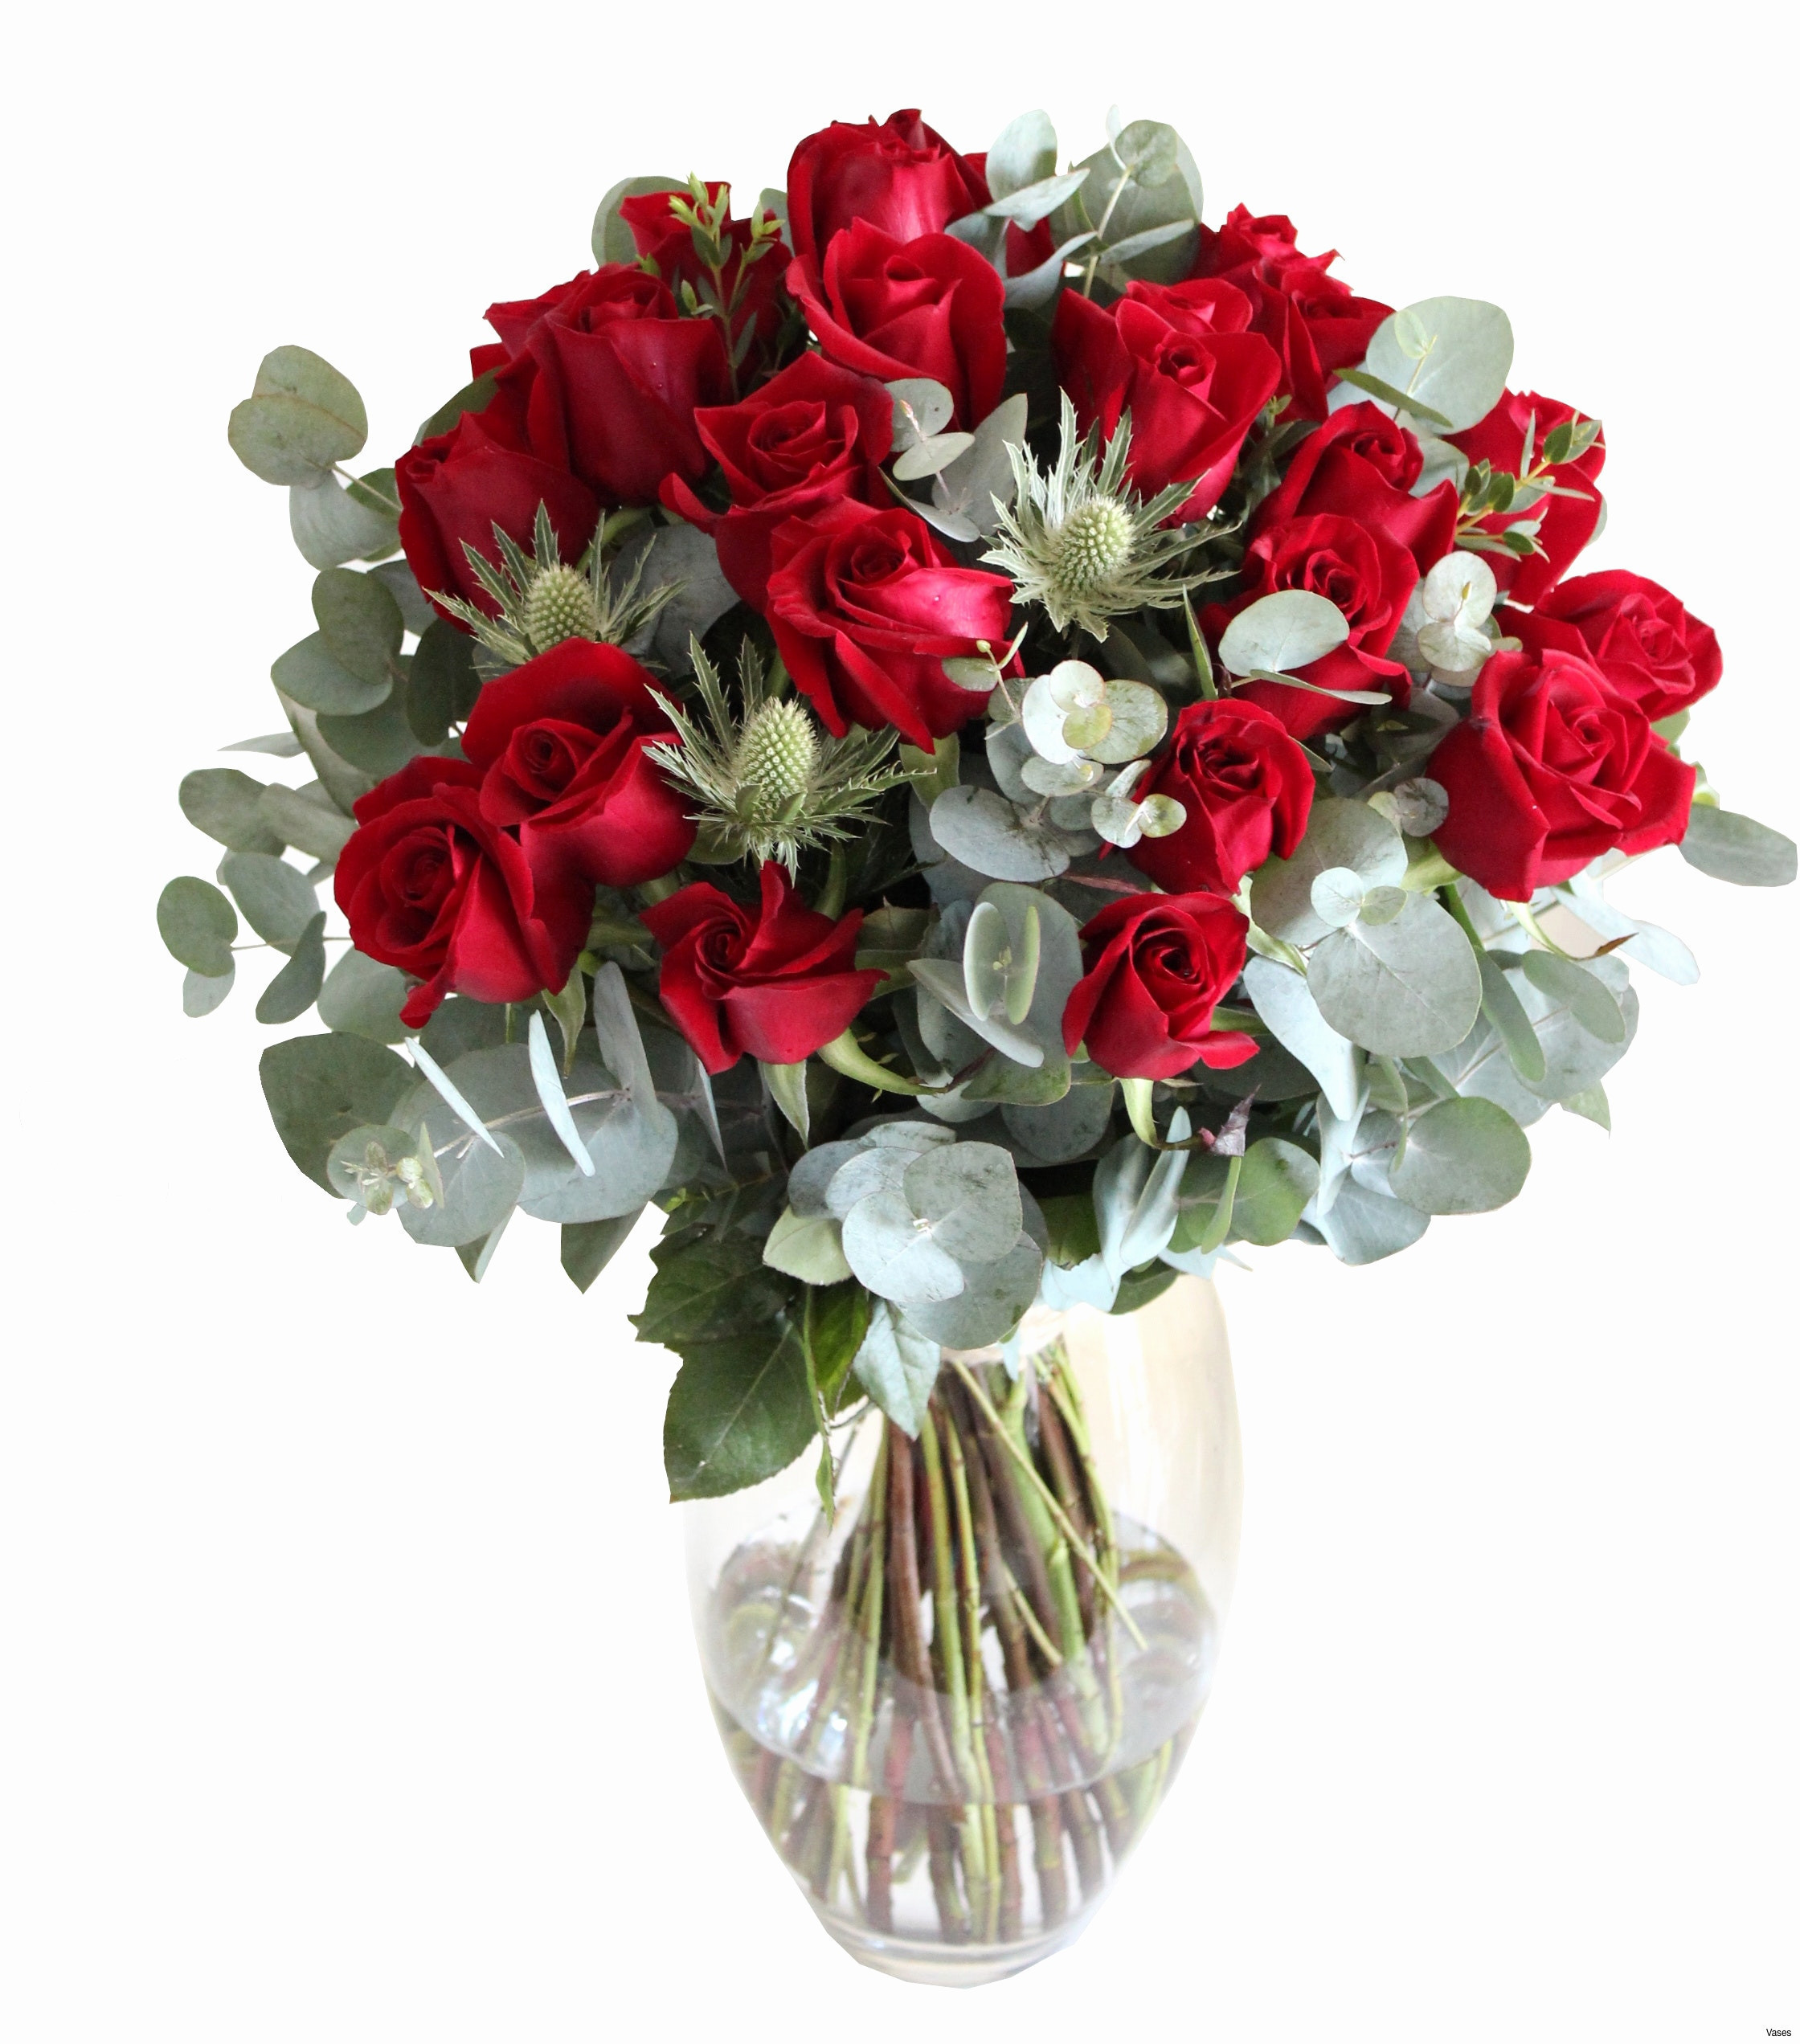 11 Wonderful Bouquet Of Flowers In Vase 2024 free download bouquet of flowers in vase of images to color inspirational to color fresh 24 red roses in vaseh pertaining to images to color inspirational to color fresh 24 red roses in vaseh vases i 0d t